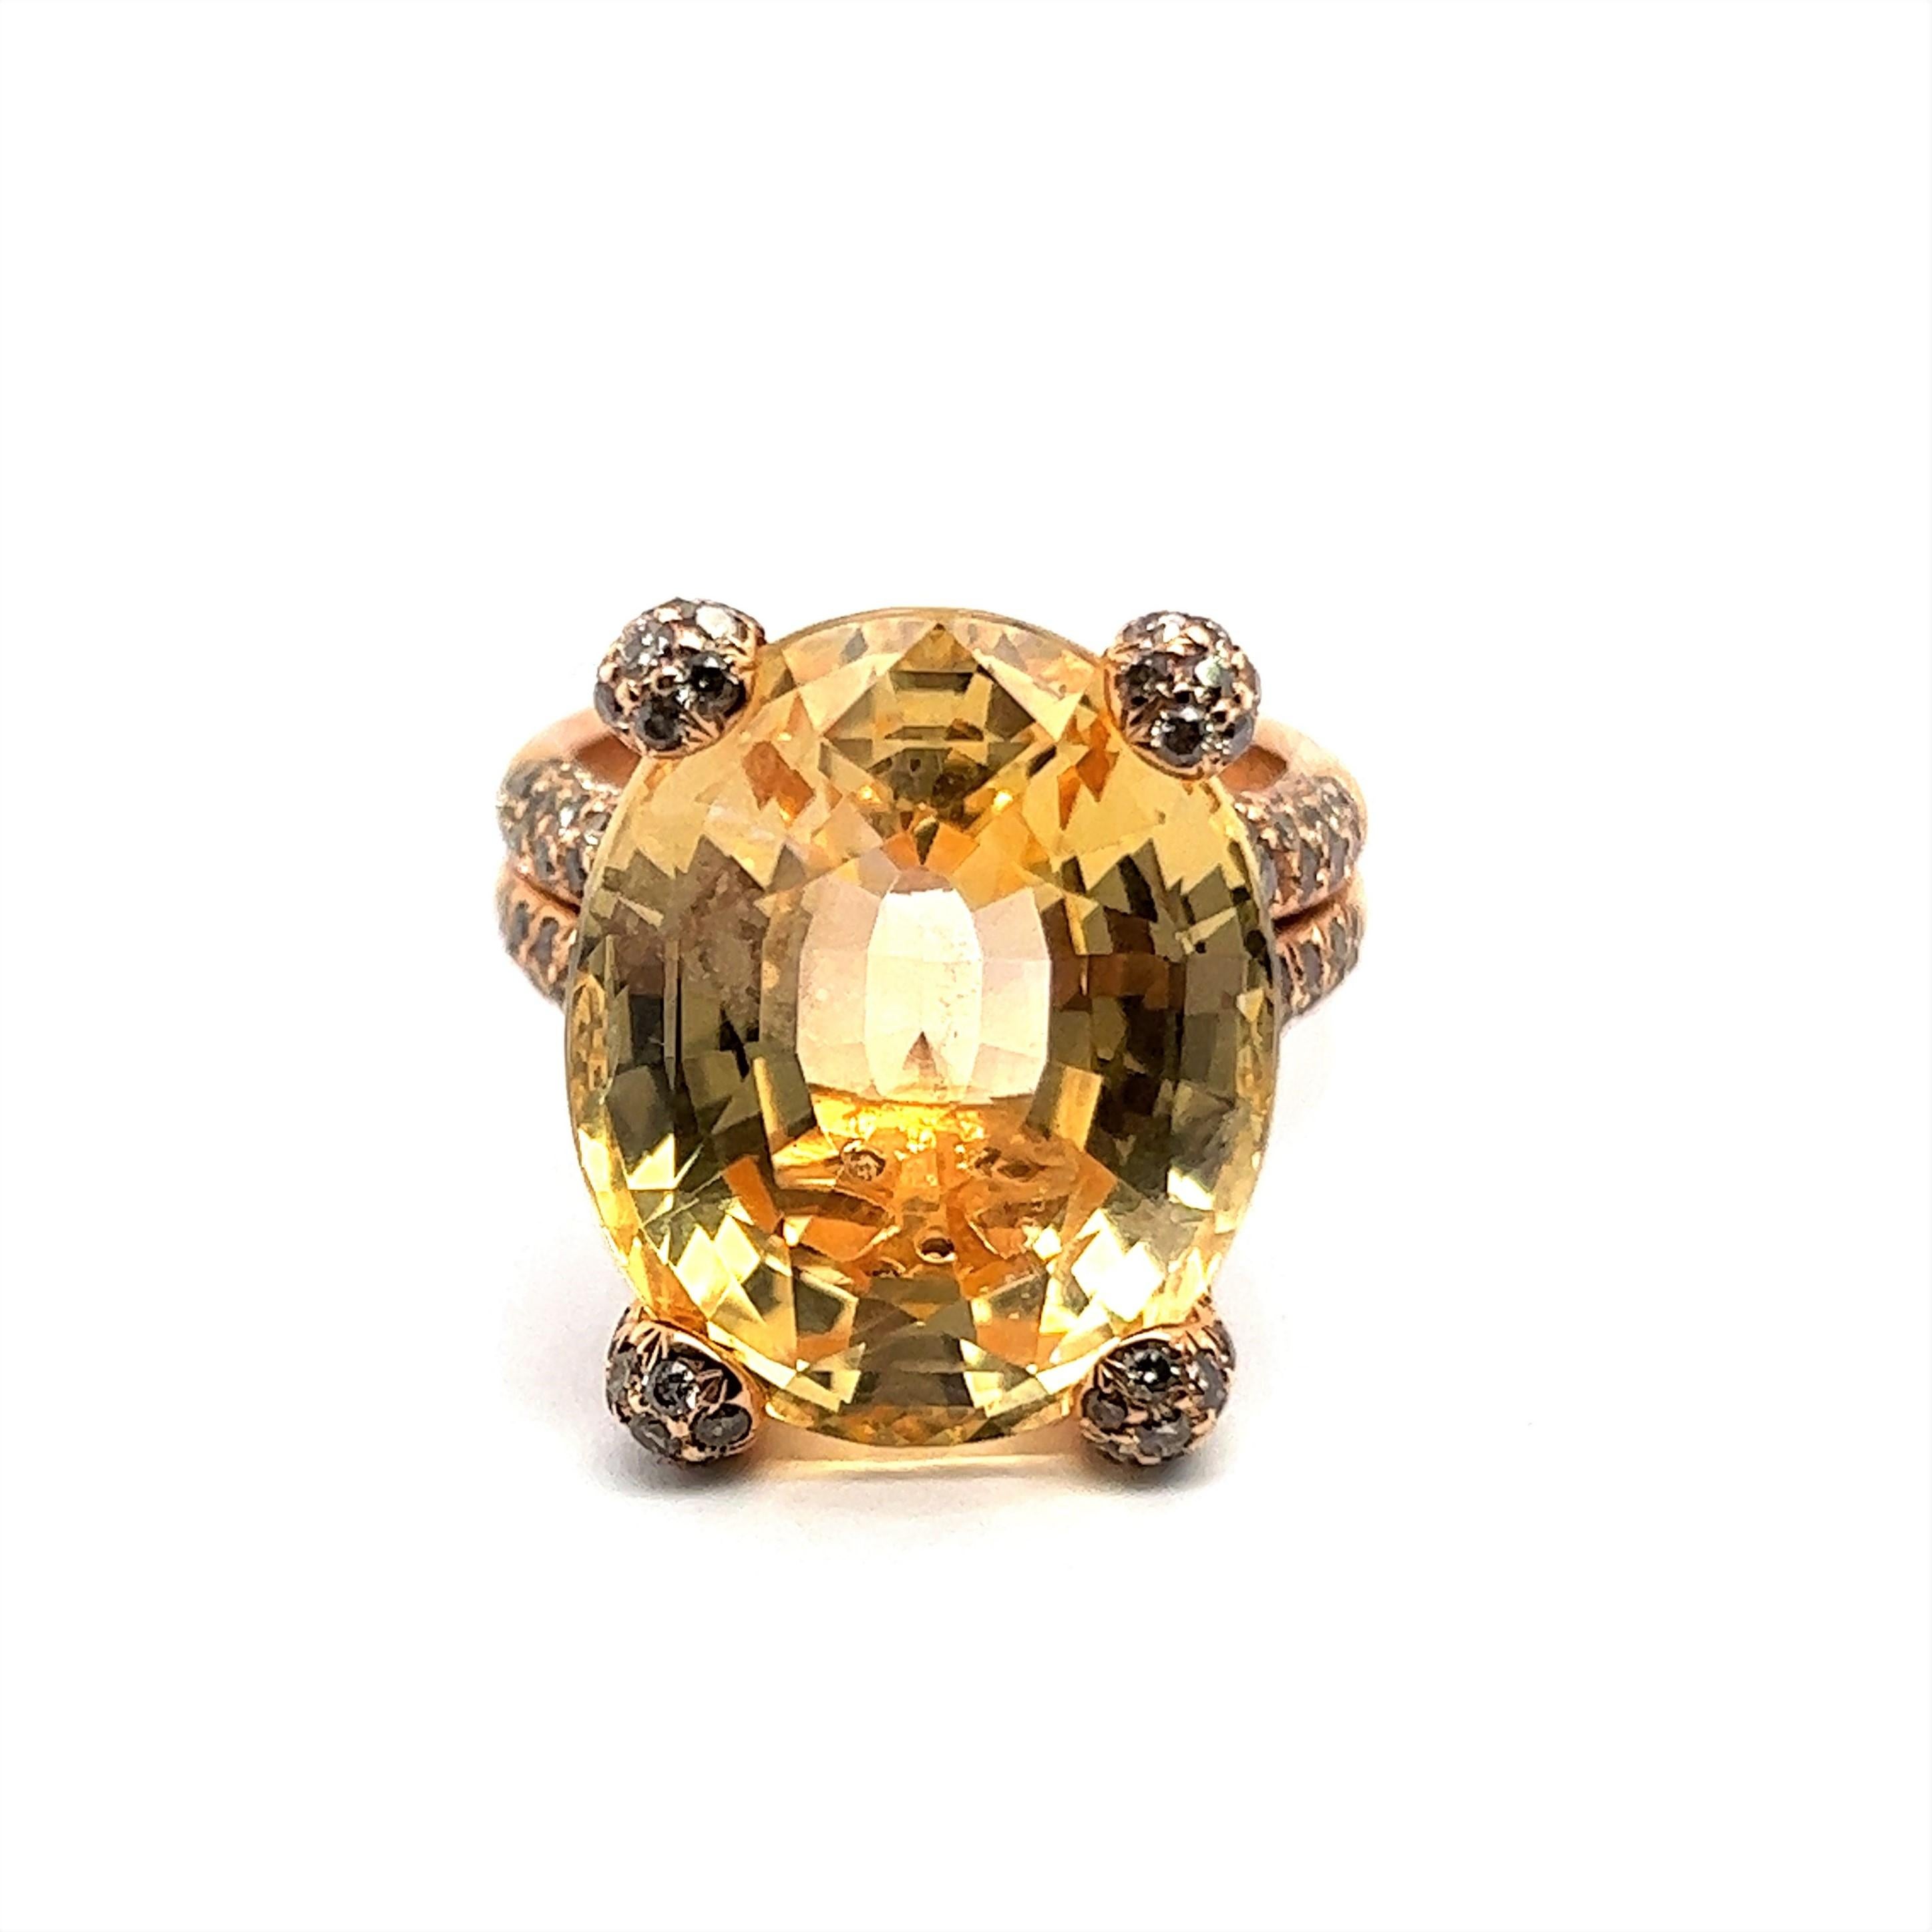 An exceptional yellow sapphire and diamond ring, striking in its majesty. 

The entire composition is designed in 18 Karat yellow gold and is a symphony of colour and joy. Its crowning piece is an impressive oval-cut yellow sapphire of 24.47 carats.